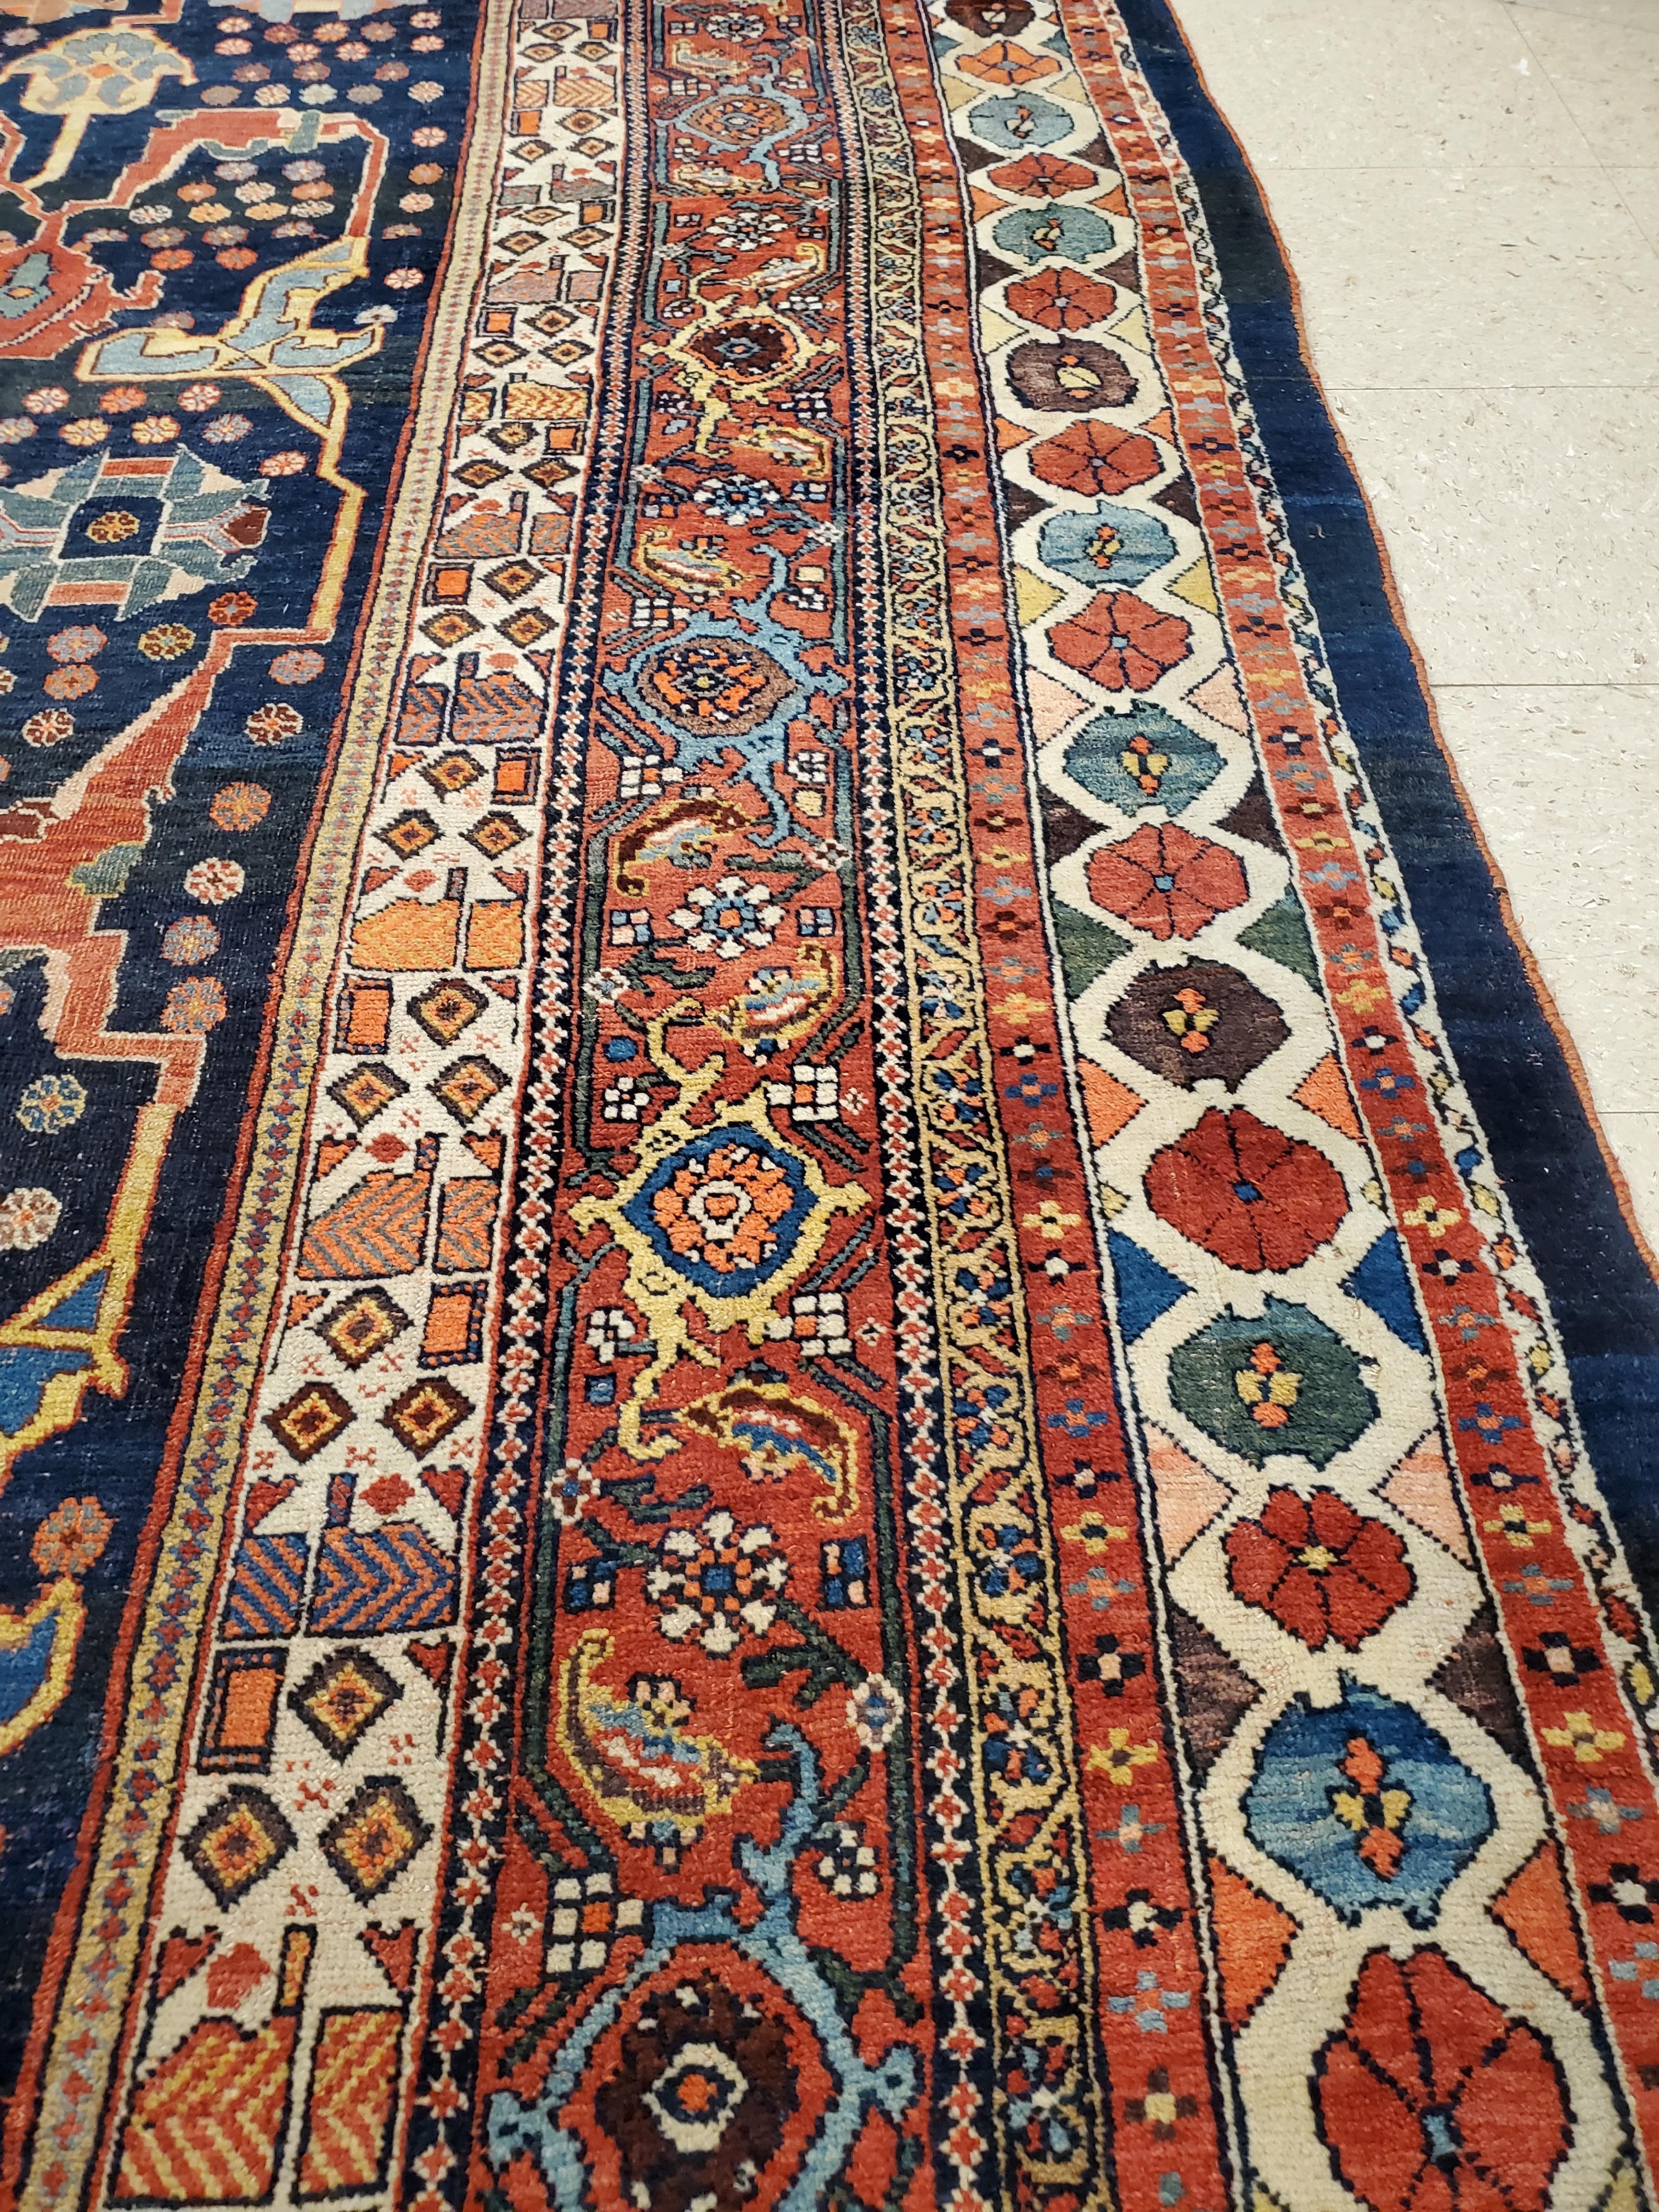 Bijar rugs are often called the iron rugs of Persia. The Bijar is a heavy durable rug that has been very popular in the United States. Most Bijar carpets are woven by Kurds in the Gerus area. This is a very nice fine example. Size: 12' x 17'10